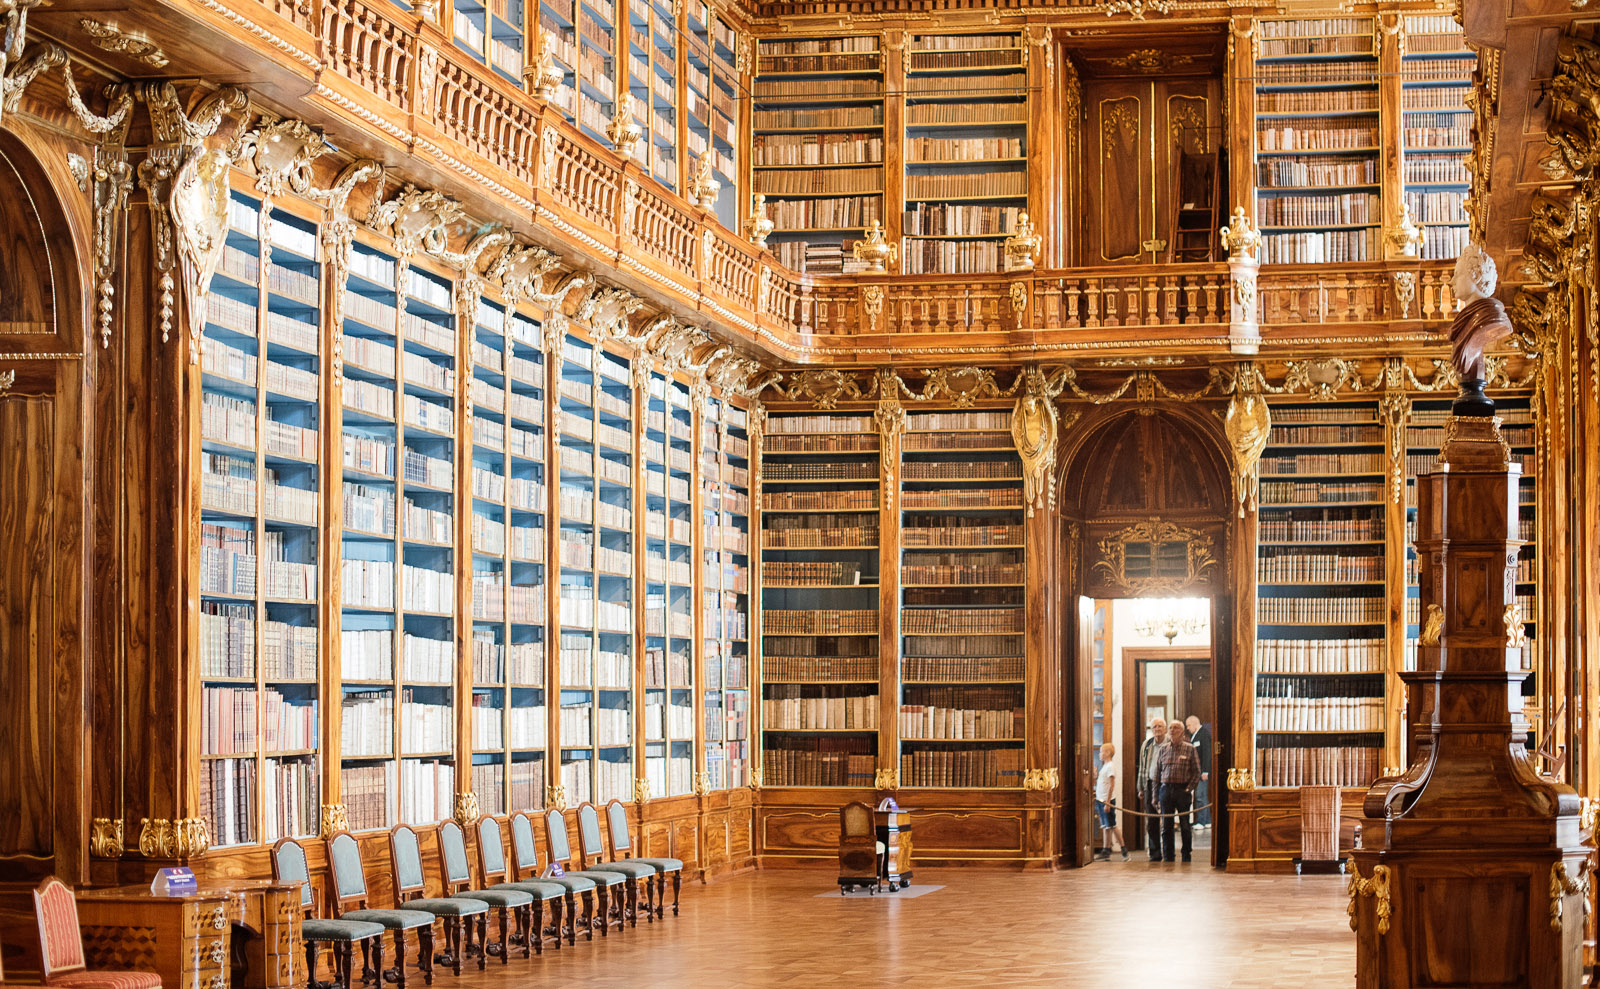 Going Behind the Scenes at the Beautiful Strahov Monastery Library in Prague